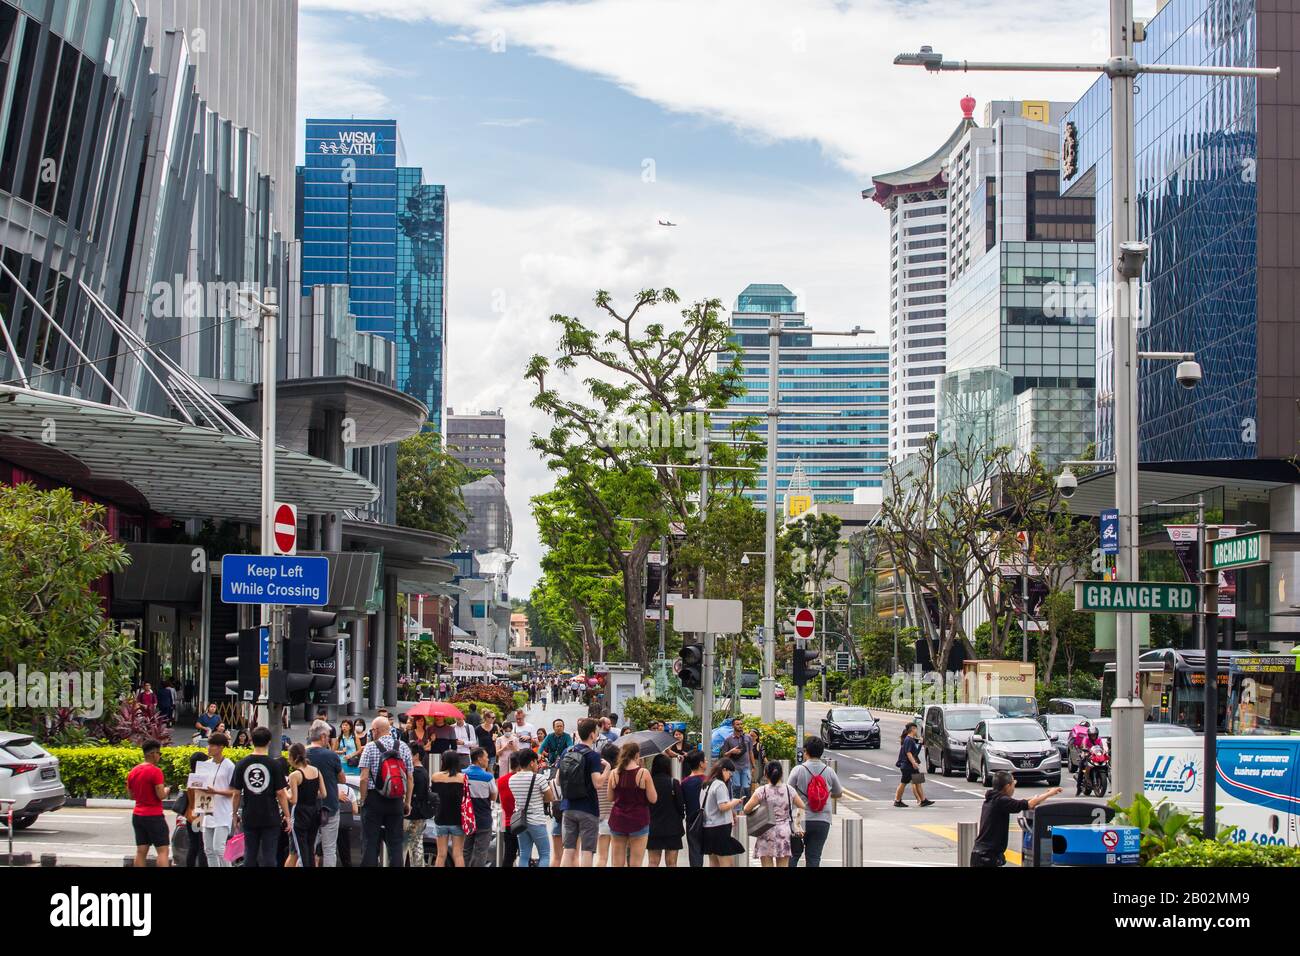 Street scenes of Orchard Road filled with hotels, crowd, a shopping belt and an aeroplane happens to fly pass on the sky. Singapore. Stock Photo